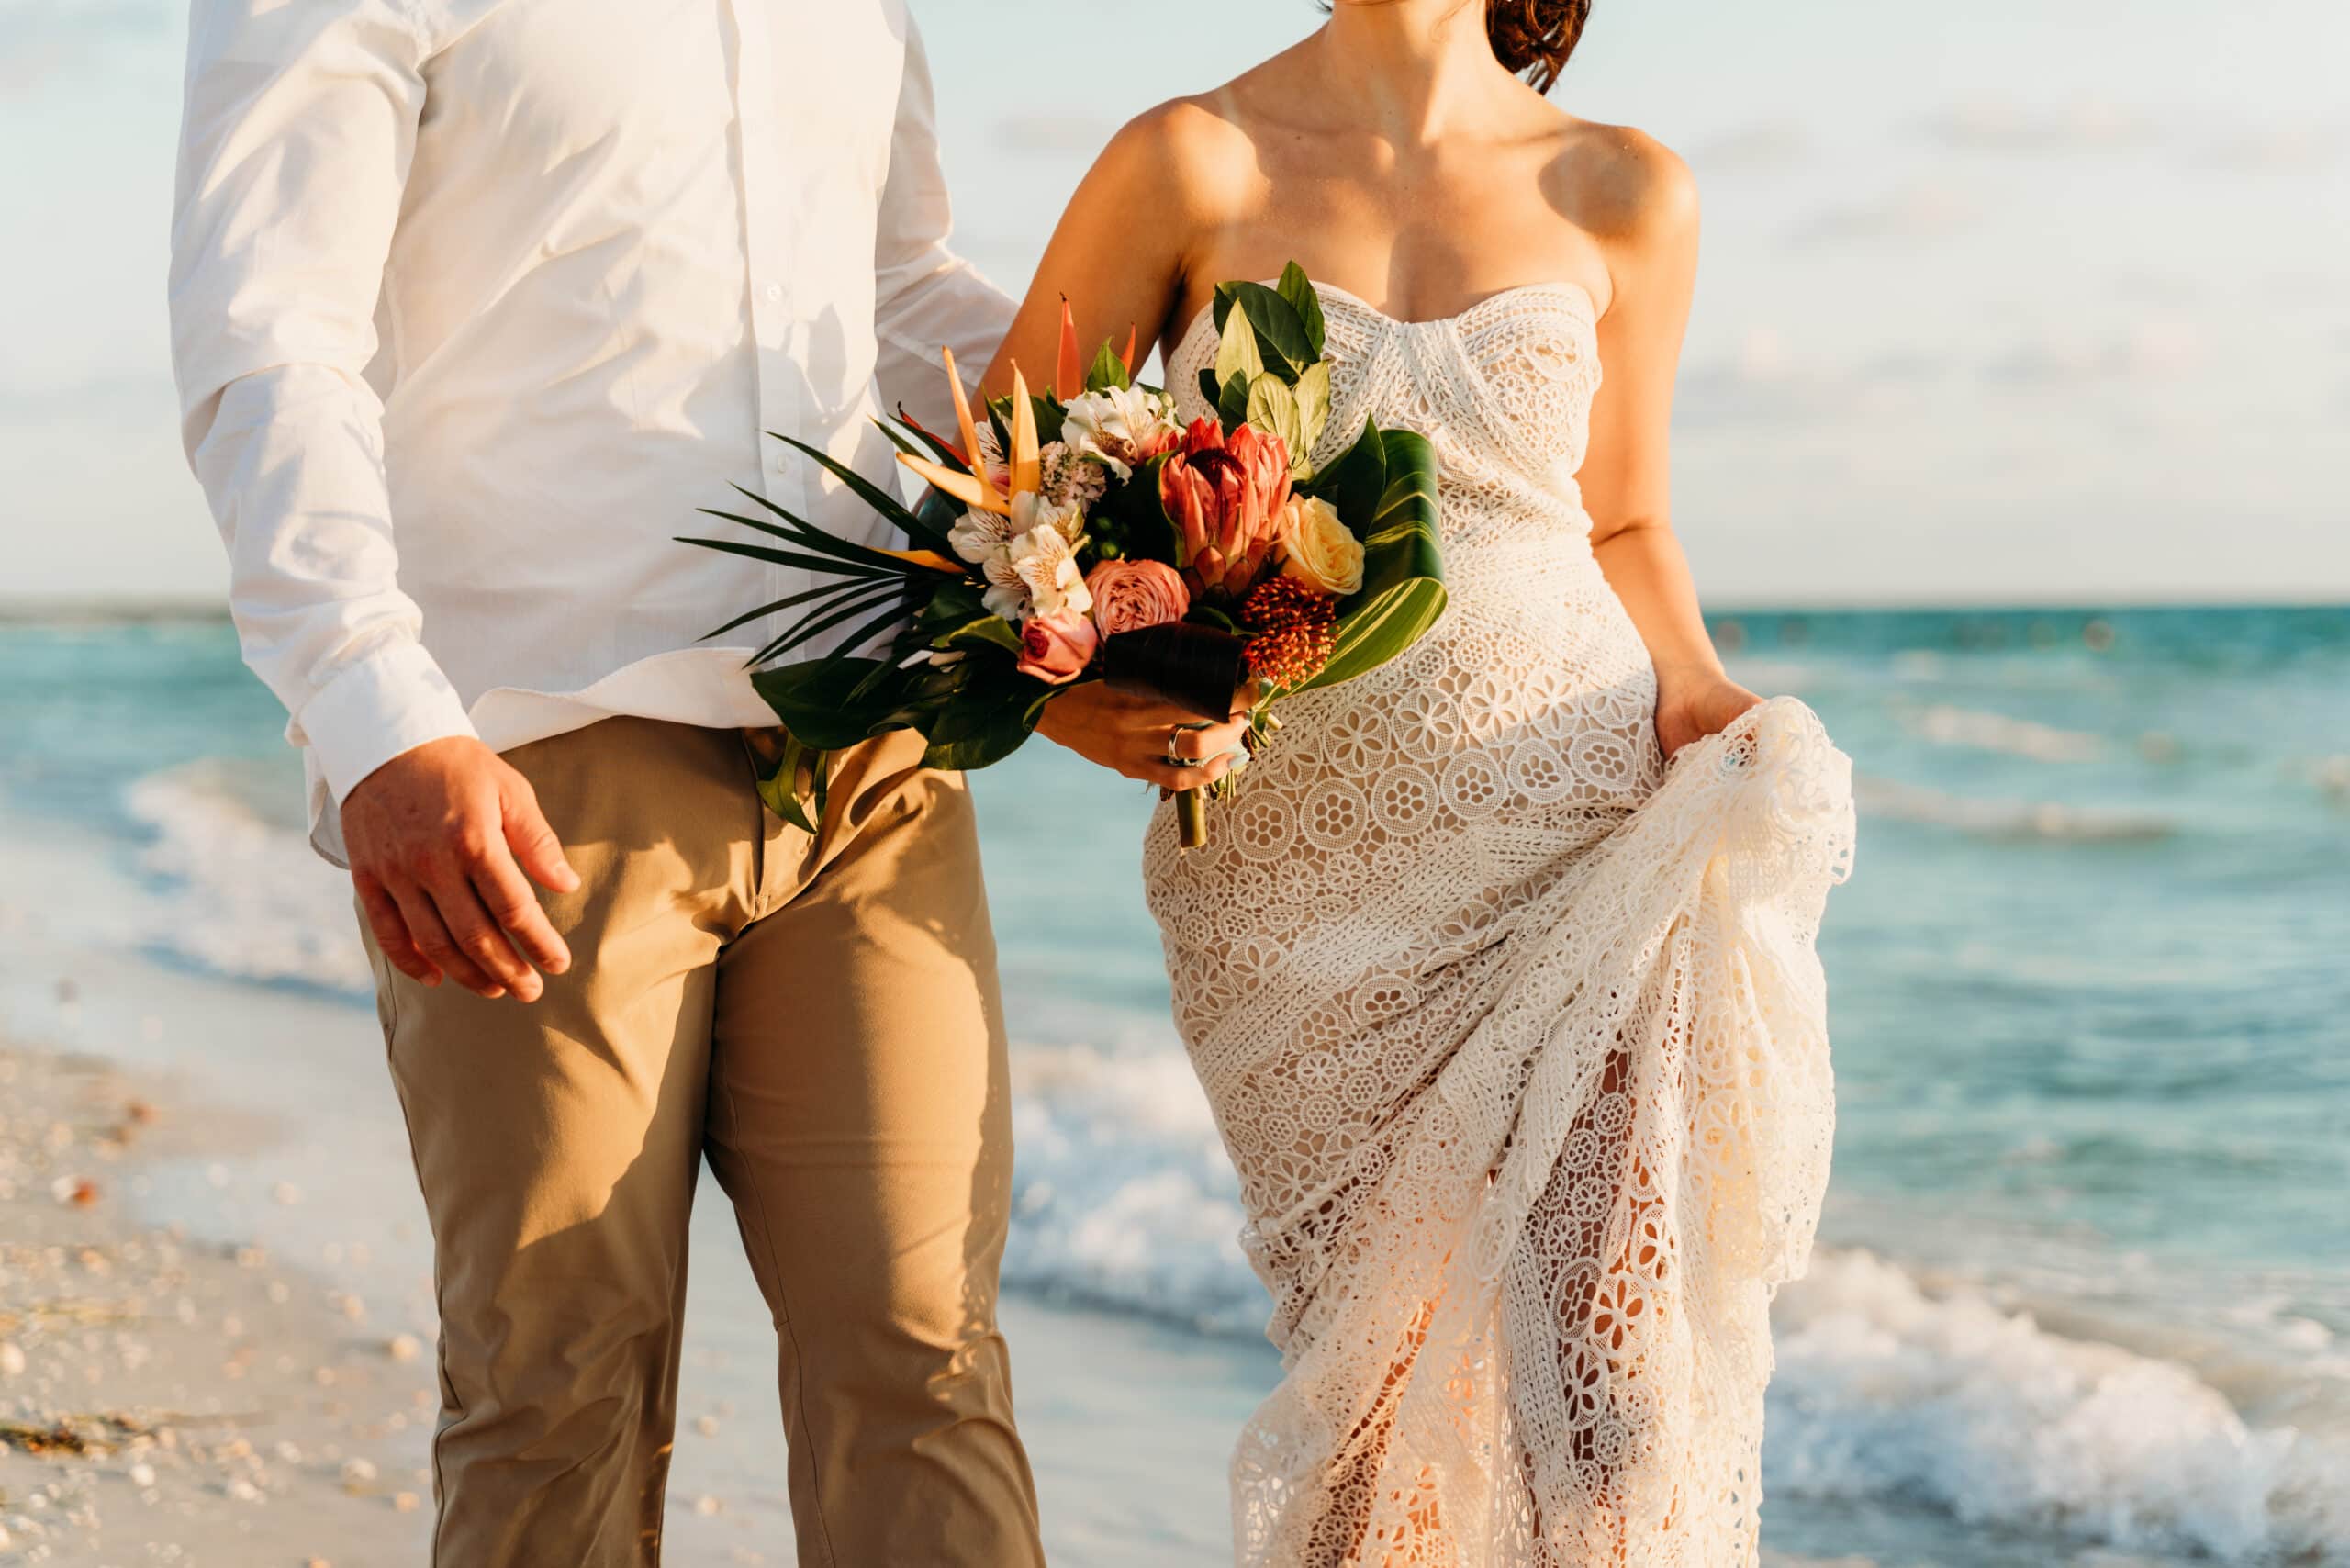 bride and groom walk together on clearwater beach after elopement ceremony